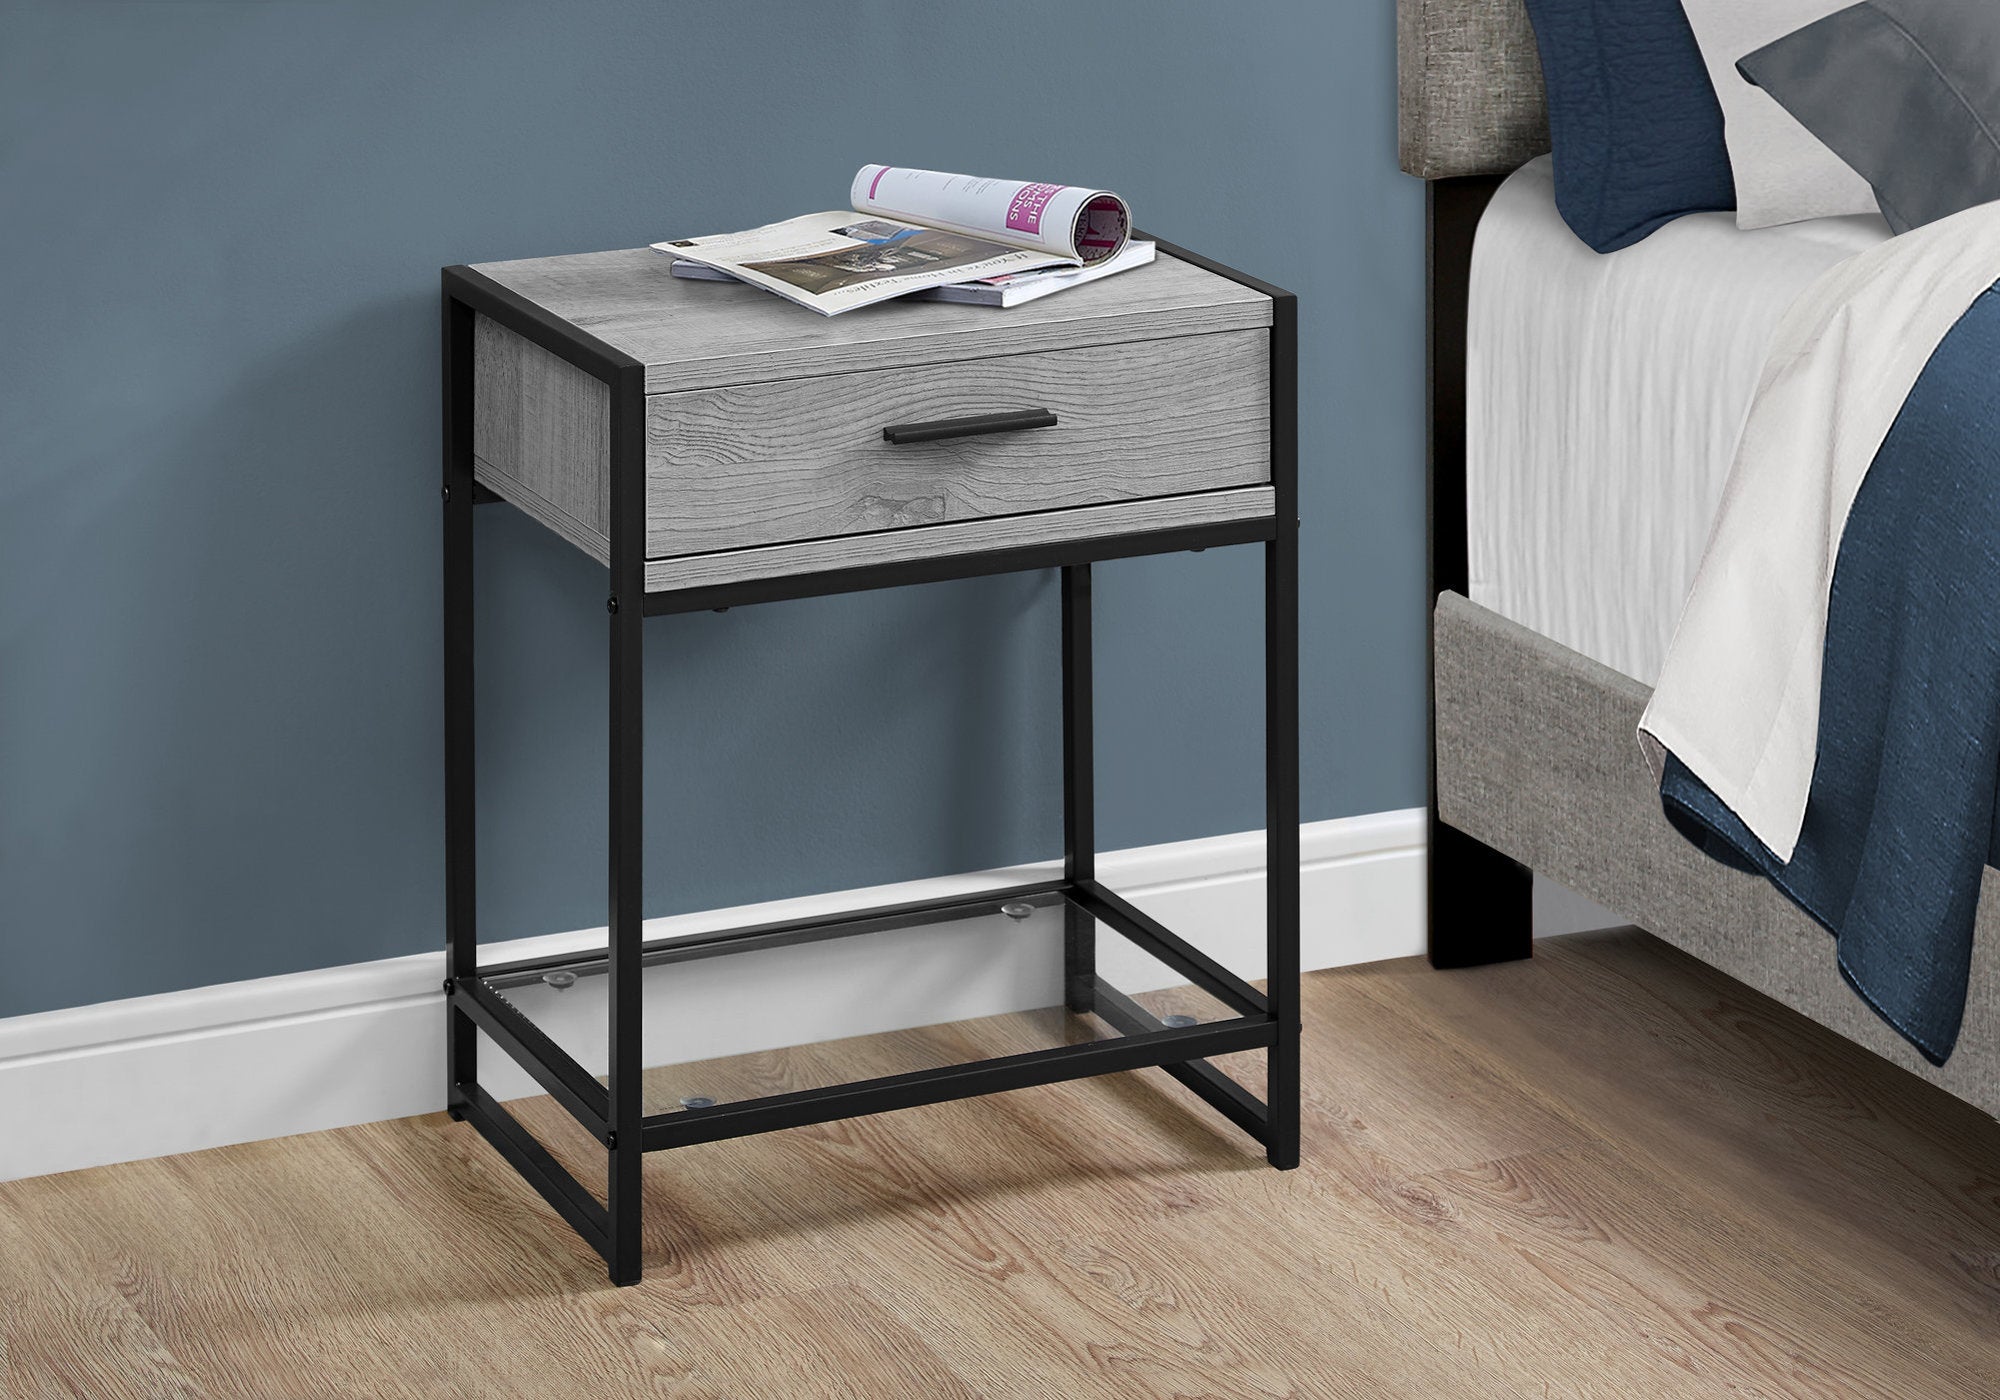 MN-973500    Accent Table, Side, End, Nightstand, Lamp, Living Room, Bedroom, Metal Legs, Tempered Glass And Laminate, Grey, Black, Contemporary, Modern